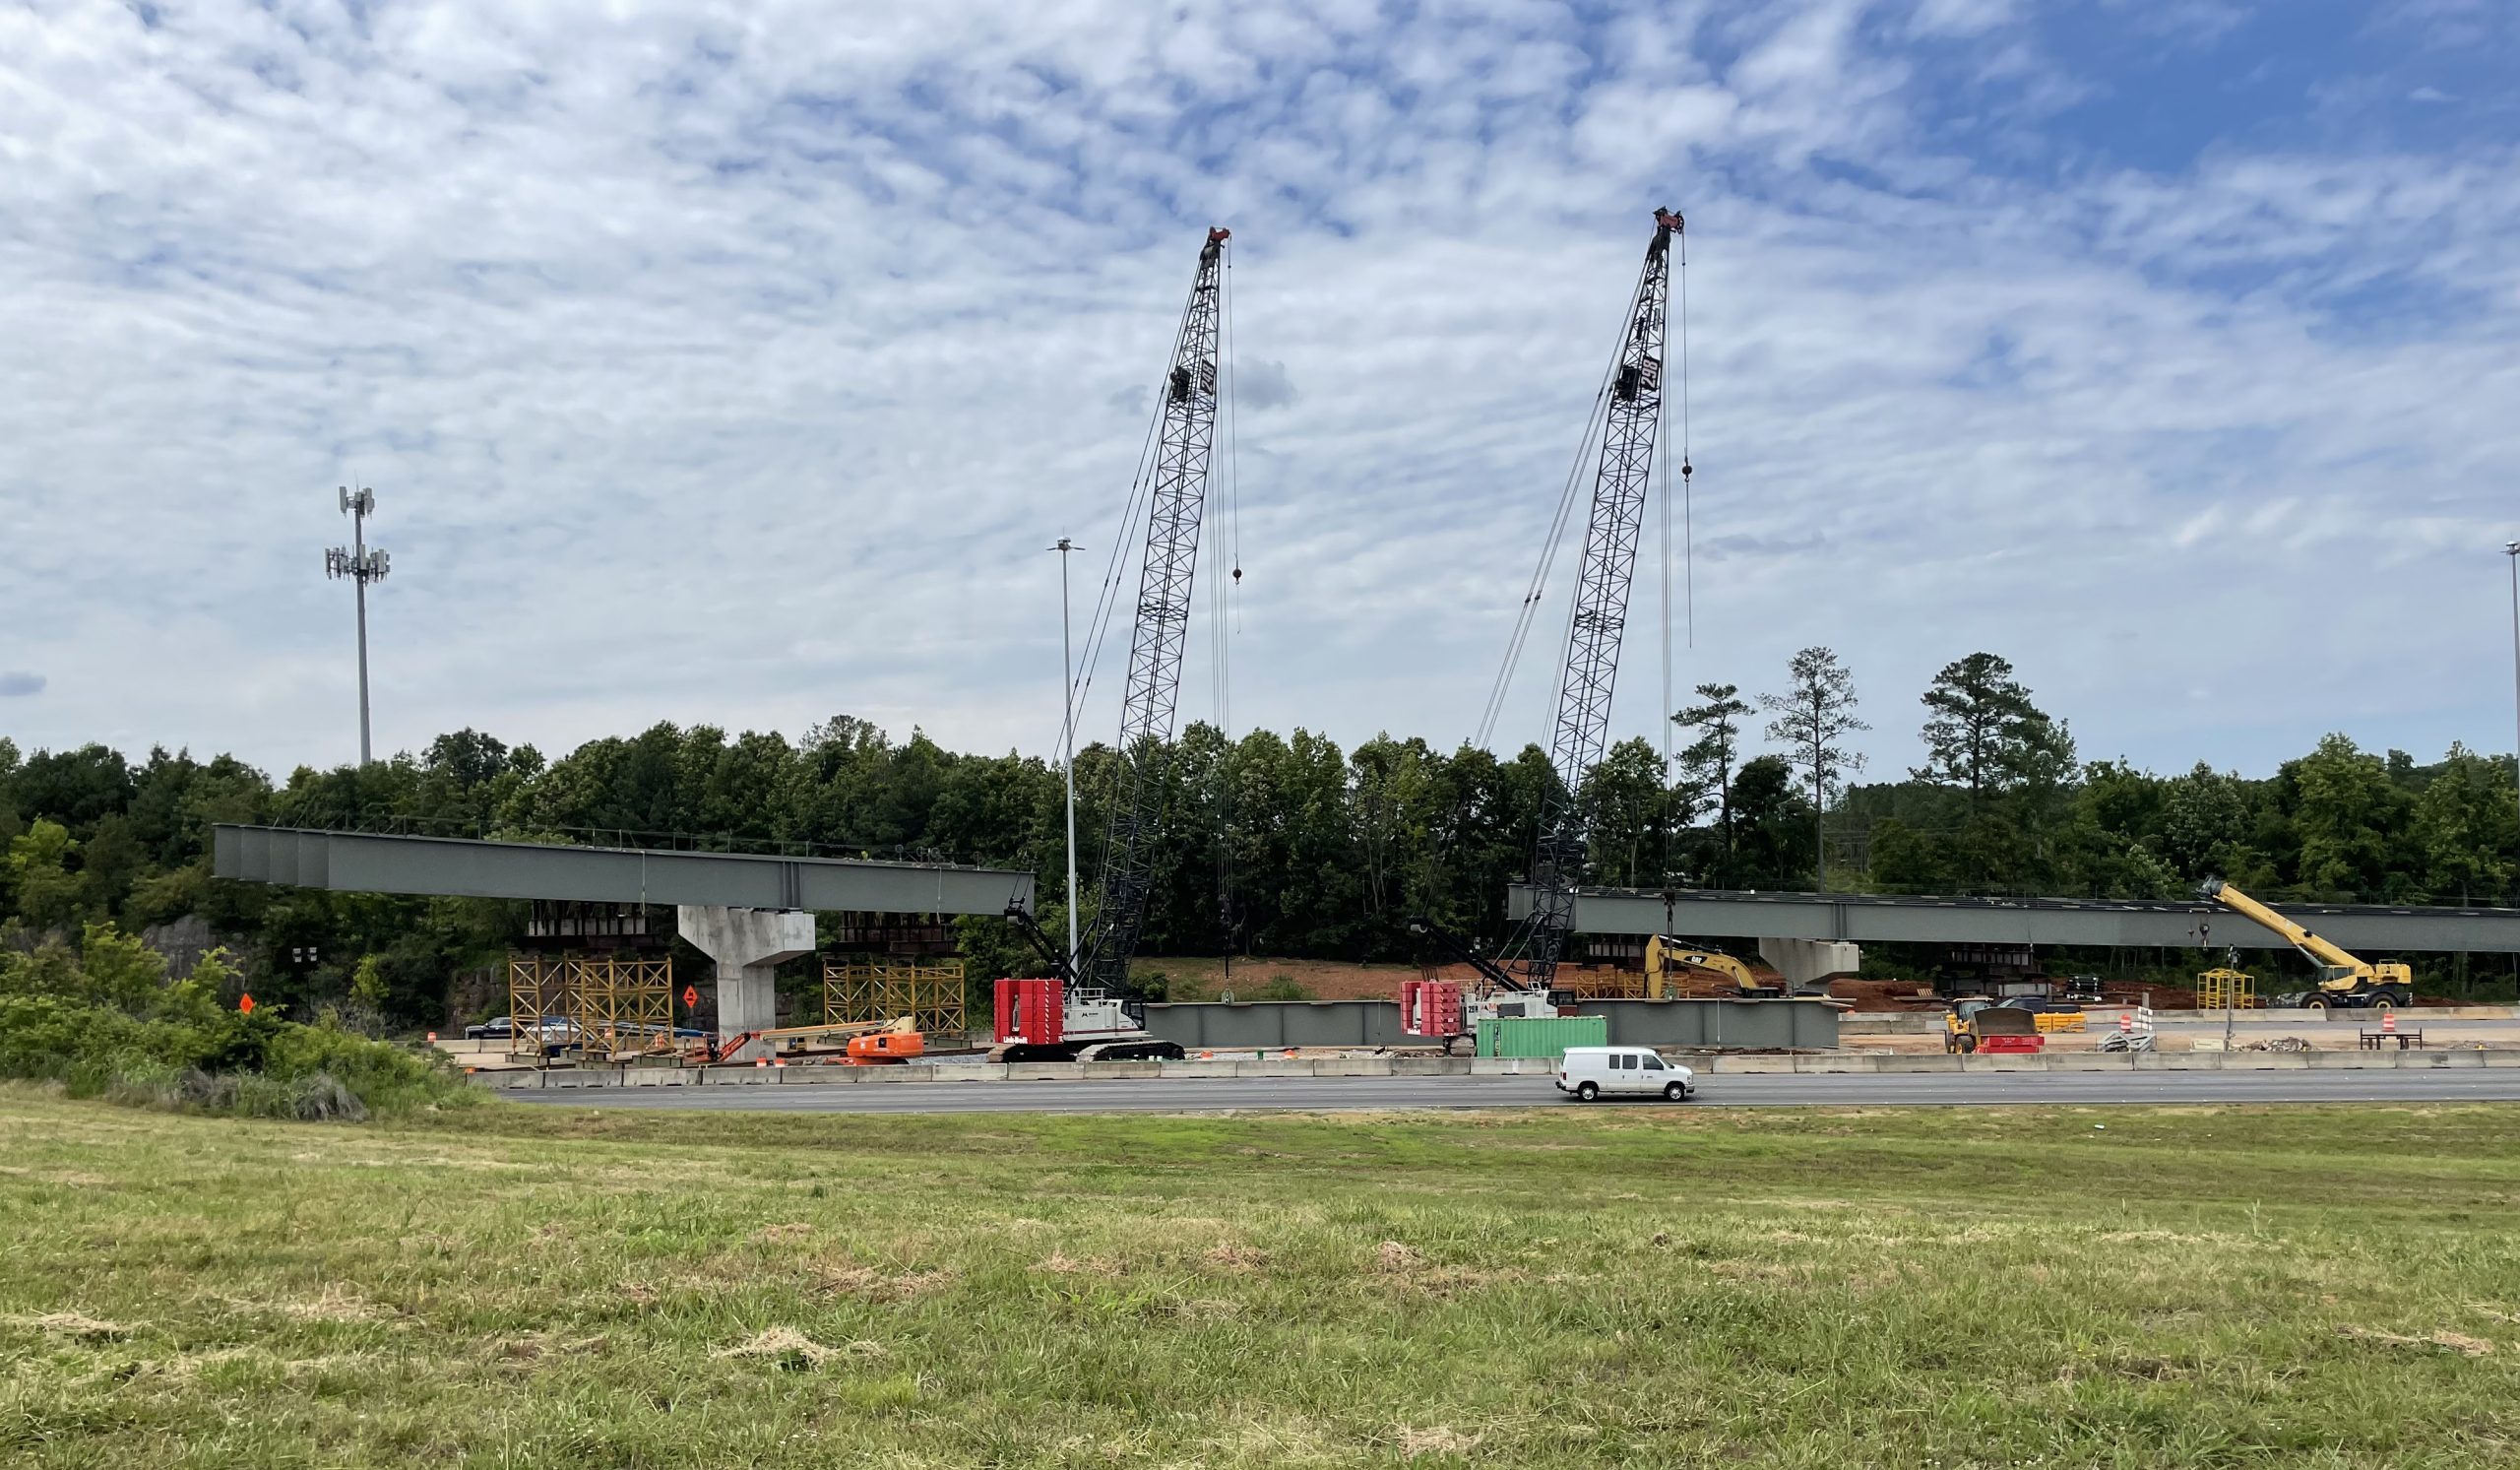 Cranes sit beside the I-565 Exit 10 westbound off-ramp, where some sets of girders have already been installed.